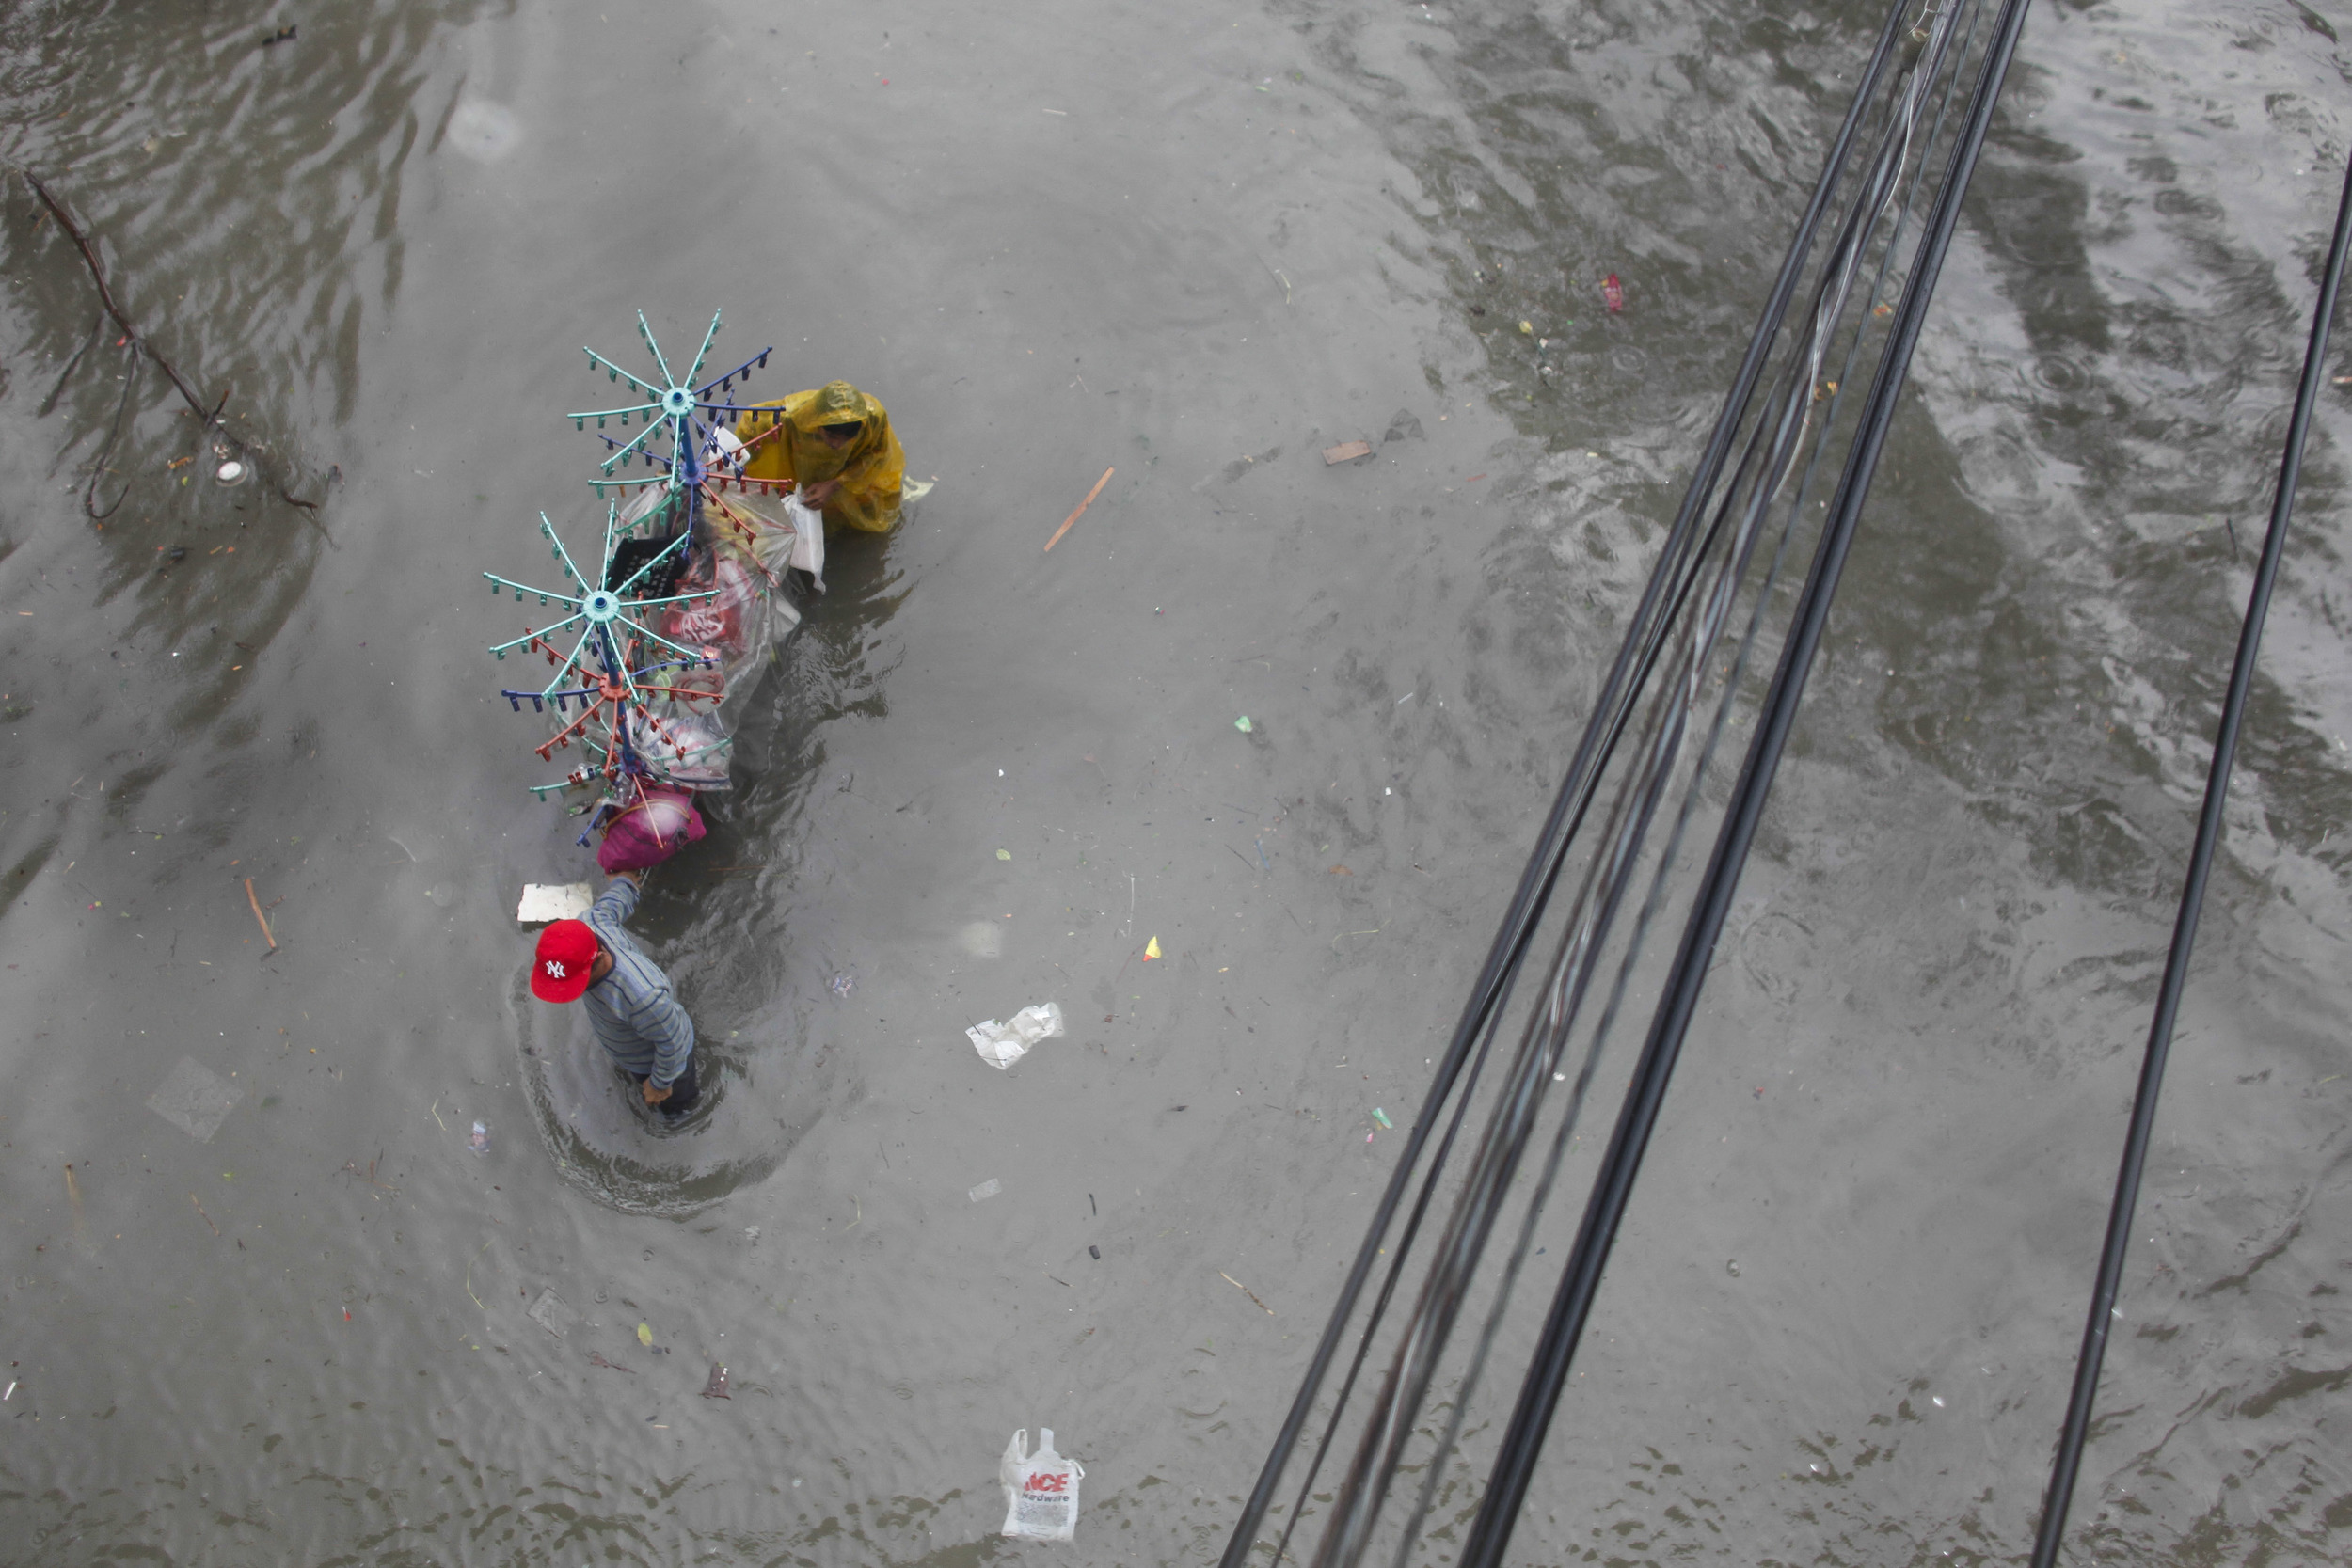  Men wade through floodwaters caused by monsoon rains in Sucat, Paranaque south of Metro Manila August 19, 2013. Heavy rain in the Philippine capital forced the closure of government offices, schools, banks and most private companies on Monday, and r